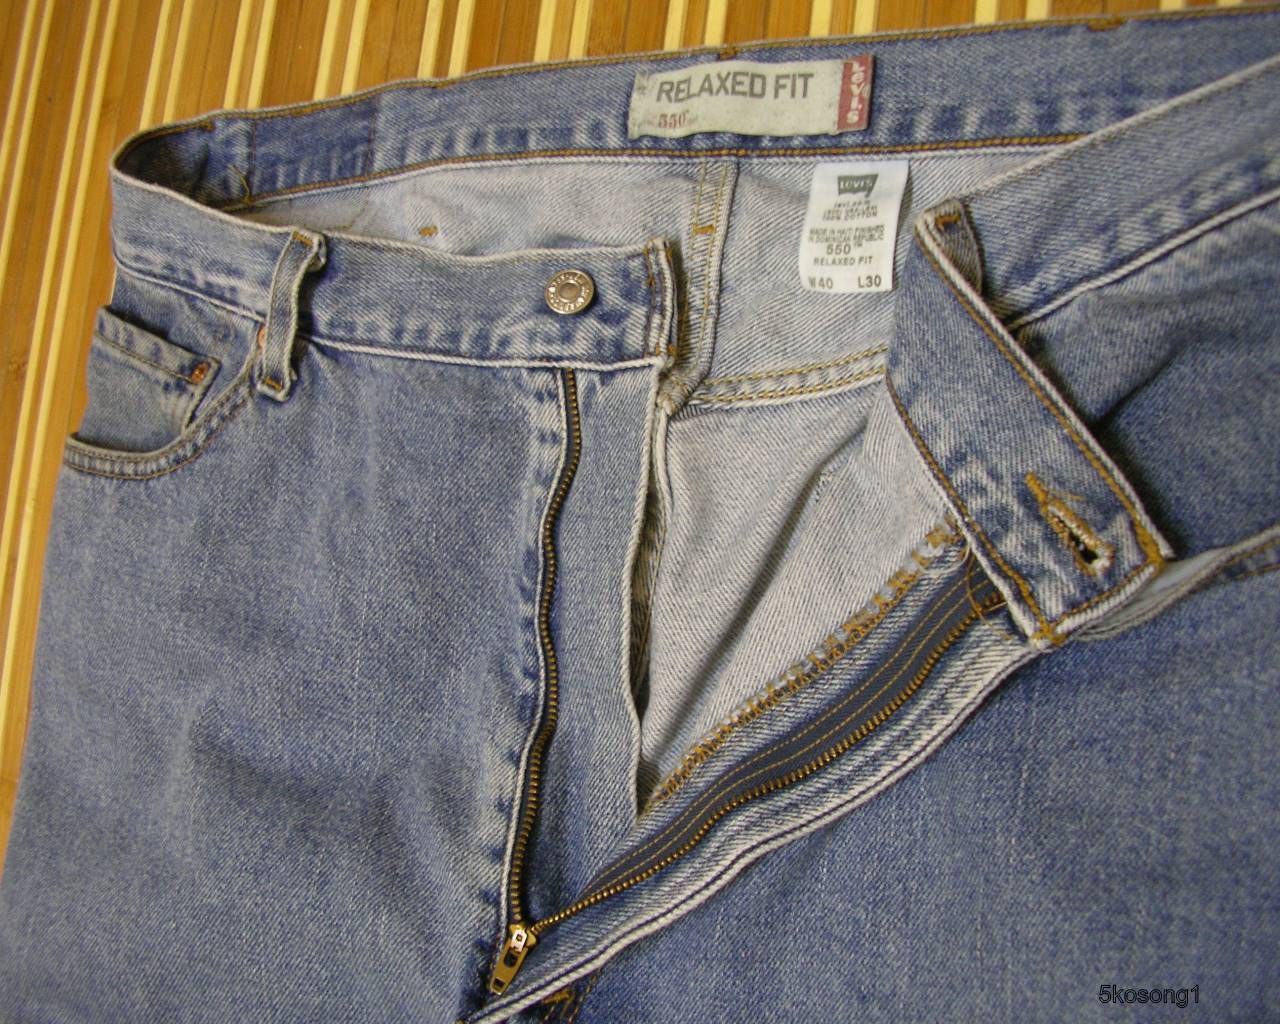 5kosong1: Levi’s 550 Relaxed Fit vs Levi’s 560 Comfort Fit